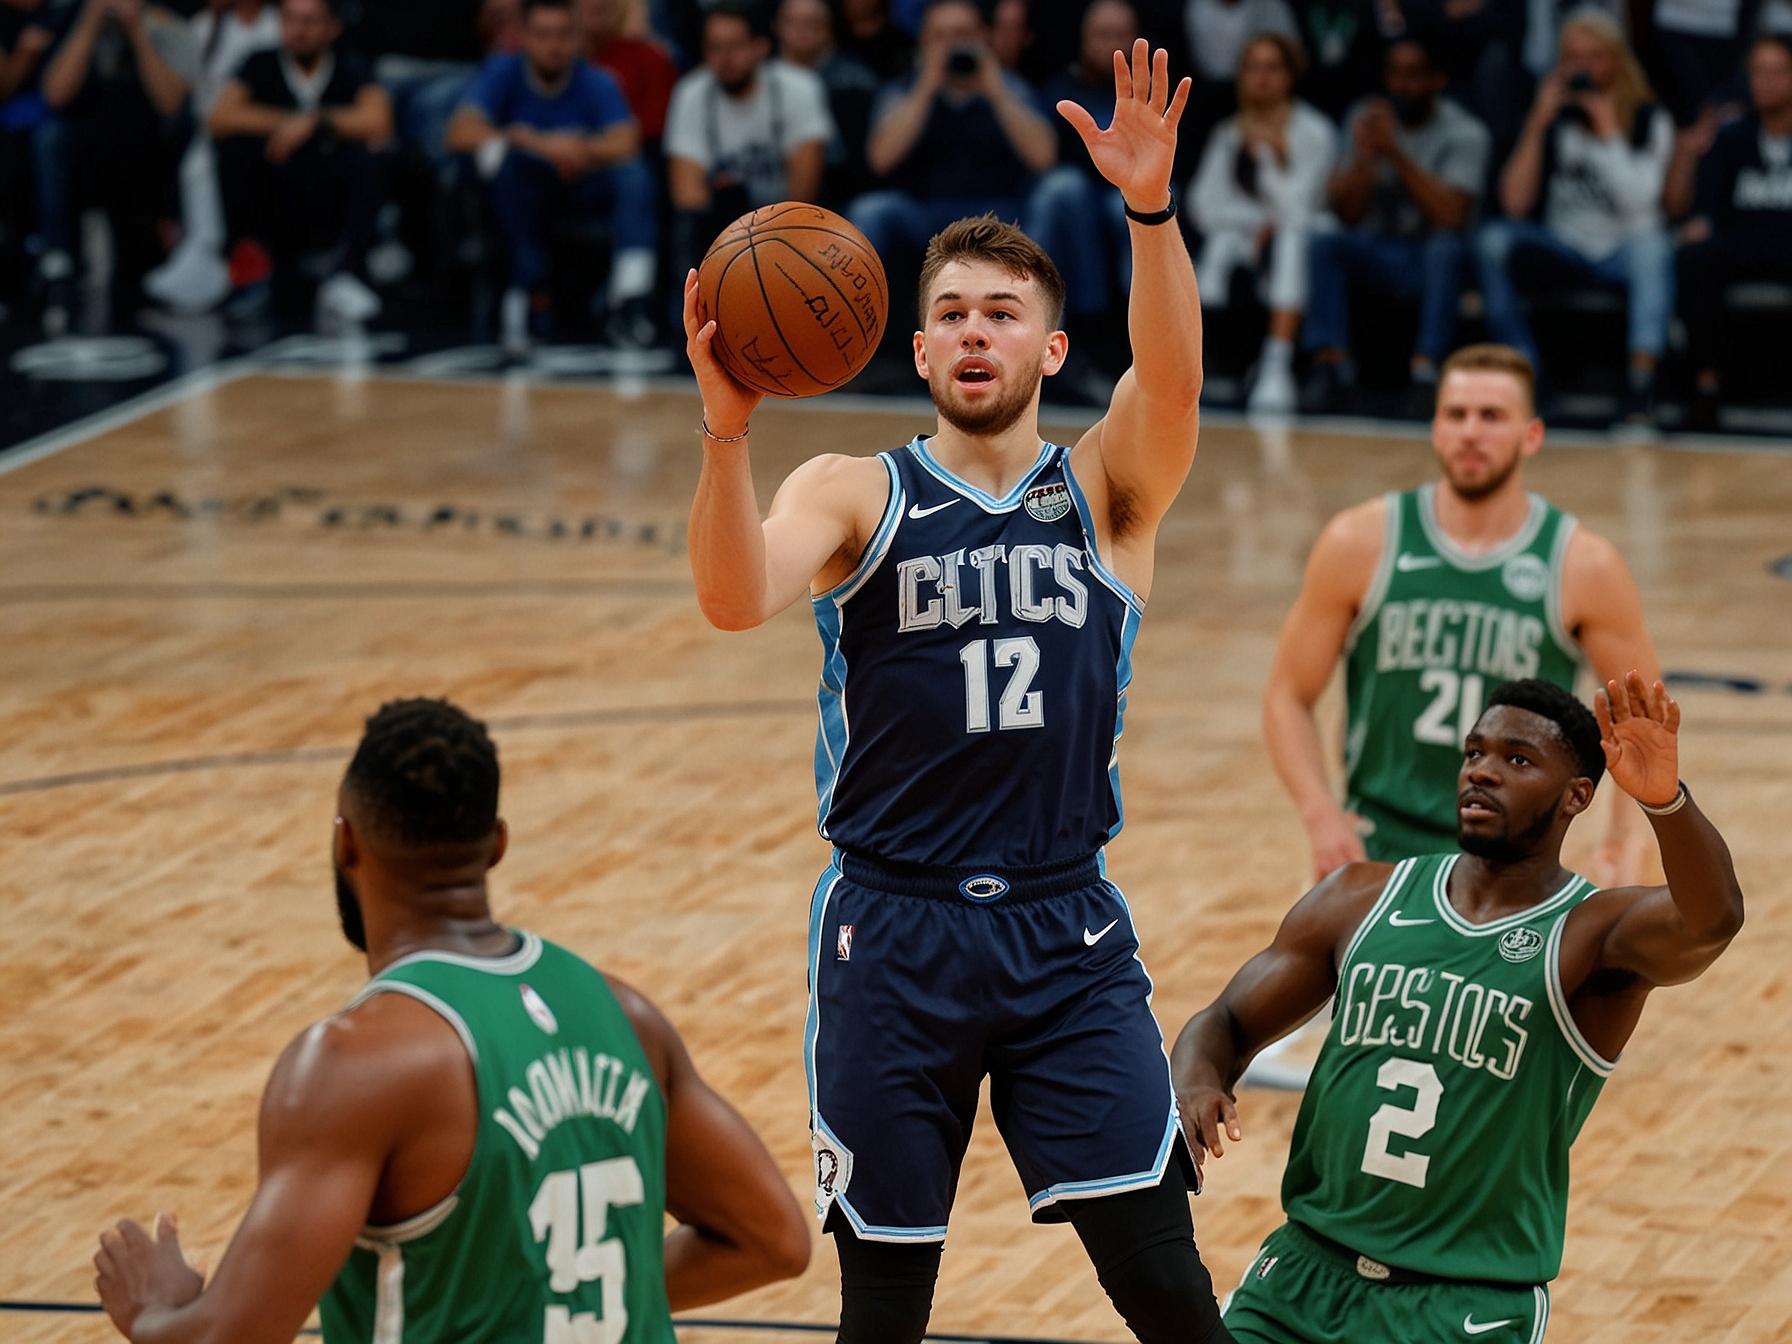 Luka Doncic attempts a shot during the NBA Finals Game 5, facing tough defense from the Boston Celtics. His shooting struggles exemplified the Mavericks' challenges throughout the crucial match.